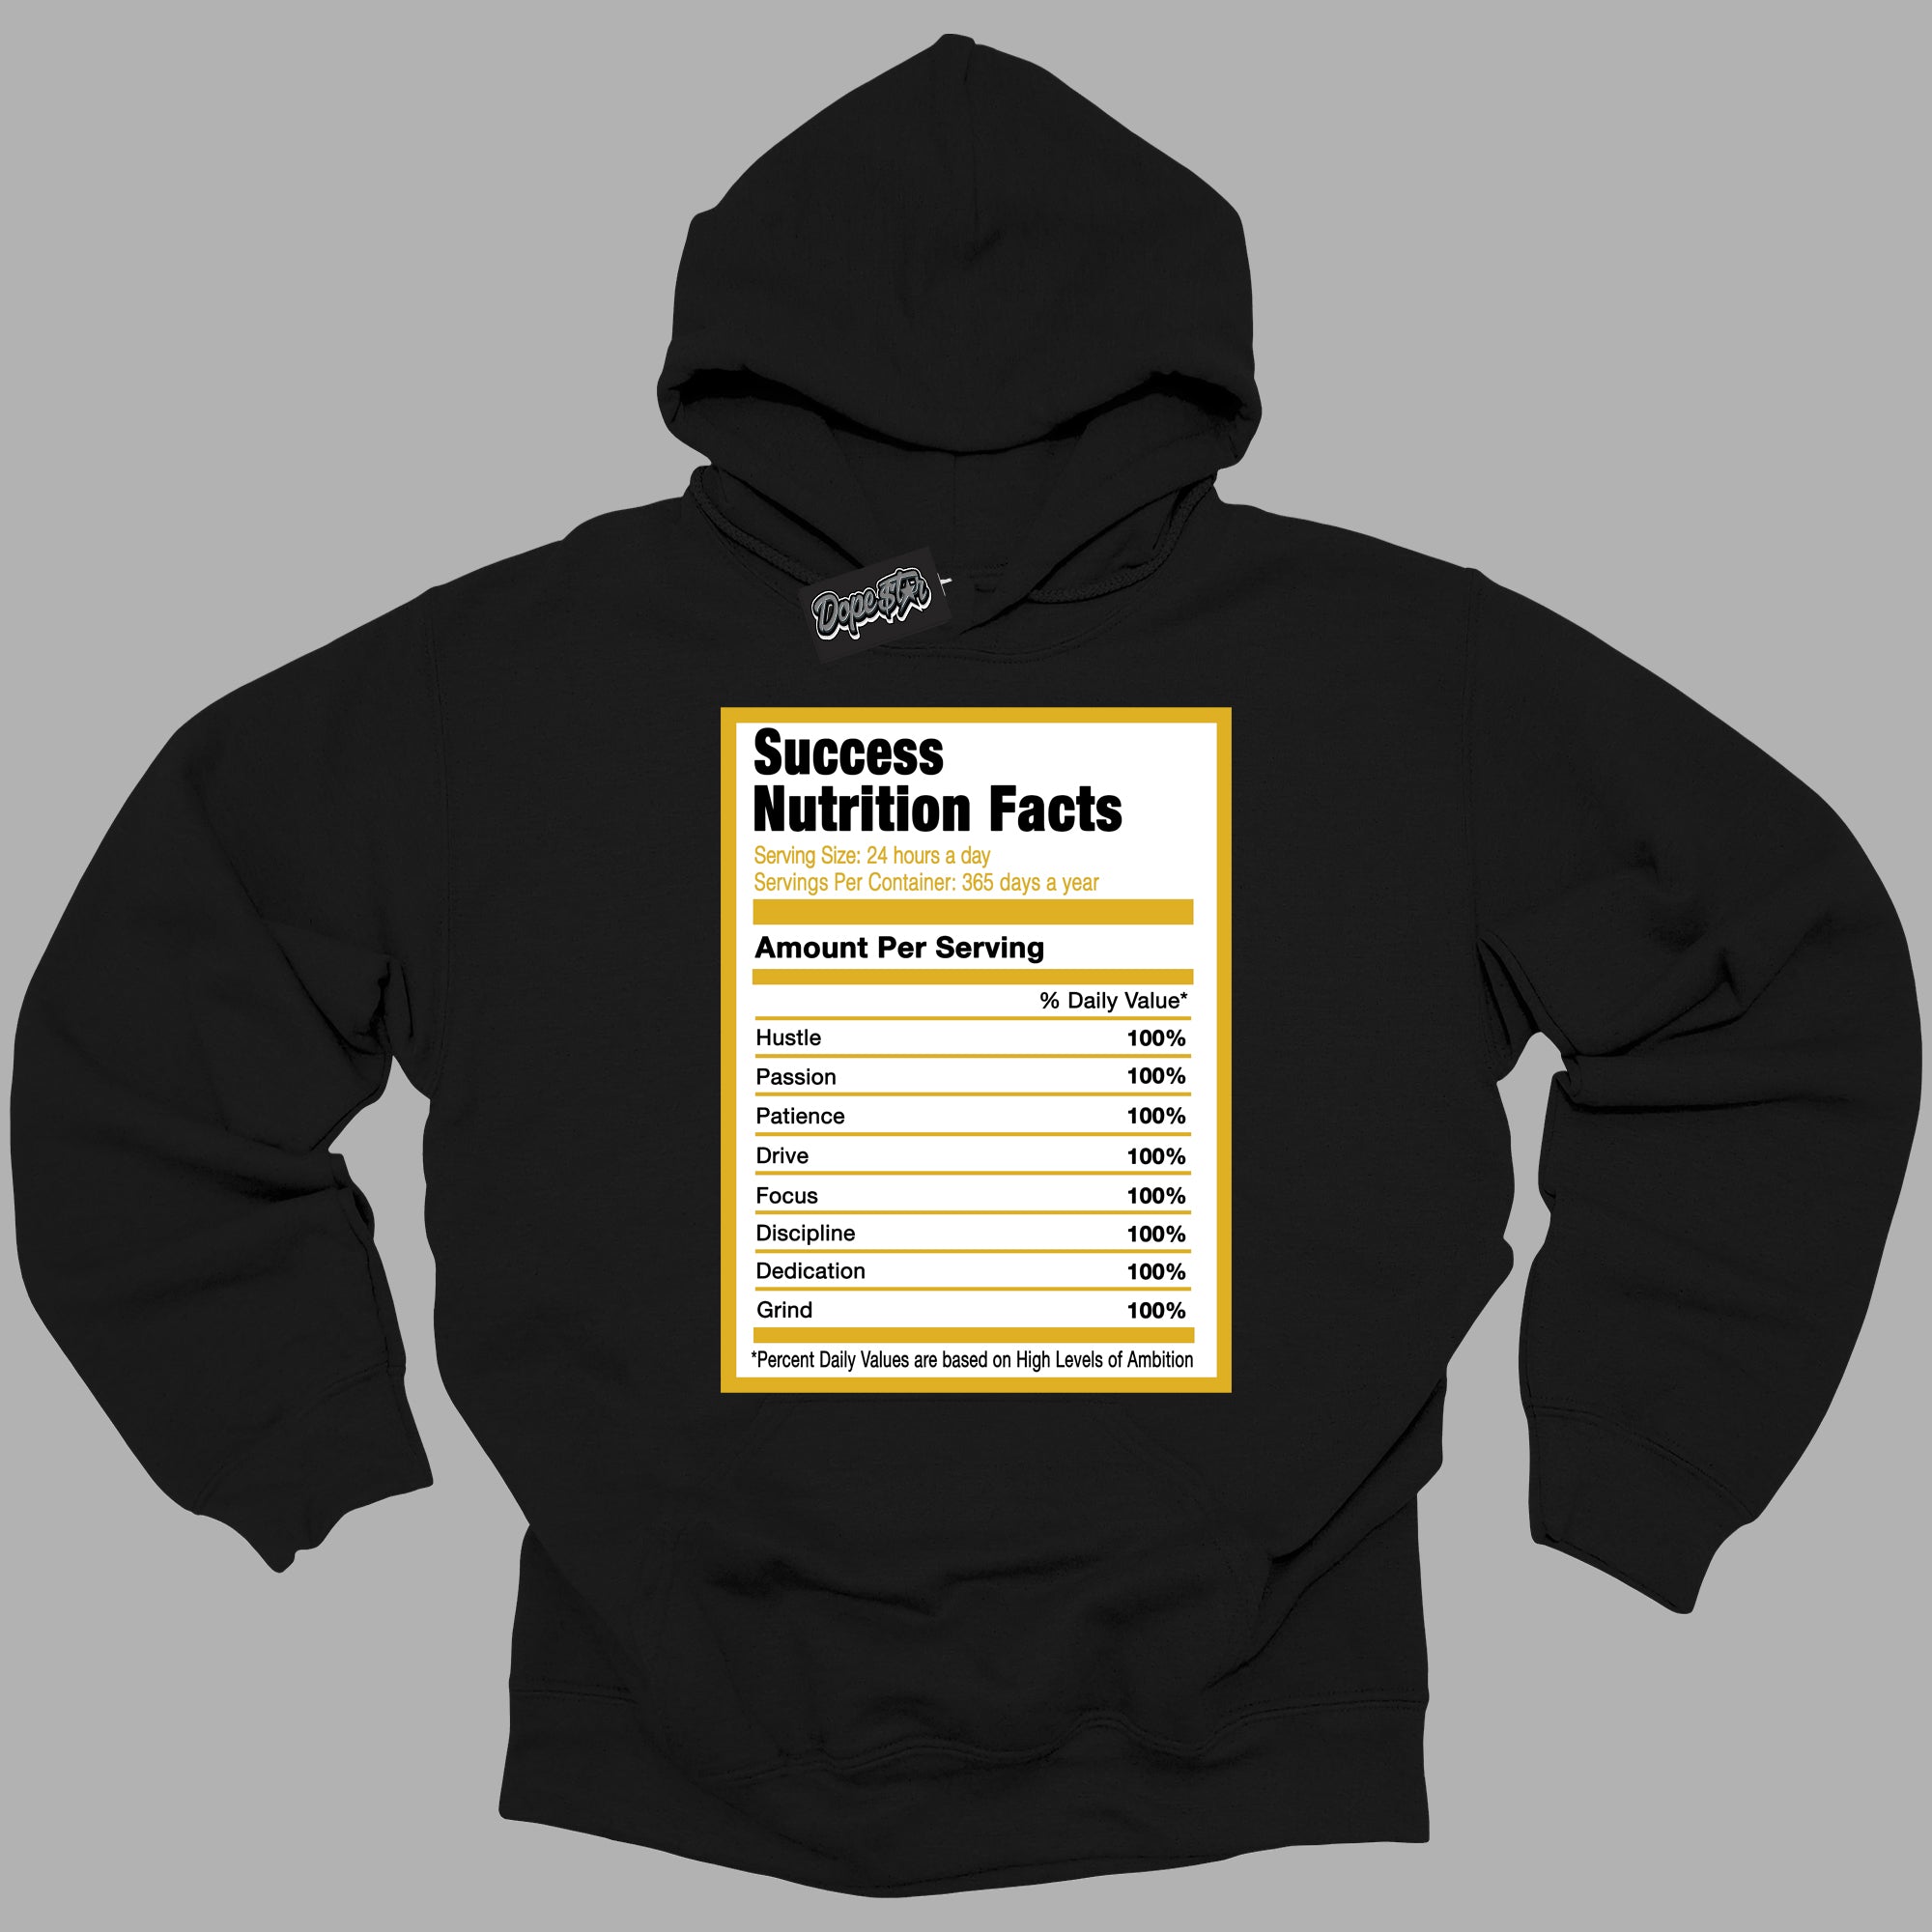 Cool Black Hoodie with “ Success Nutrition ”  design that Perfectly Matches Yellow Ochre 6s Sneakers.